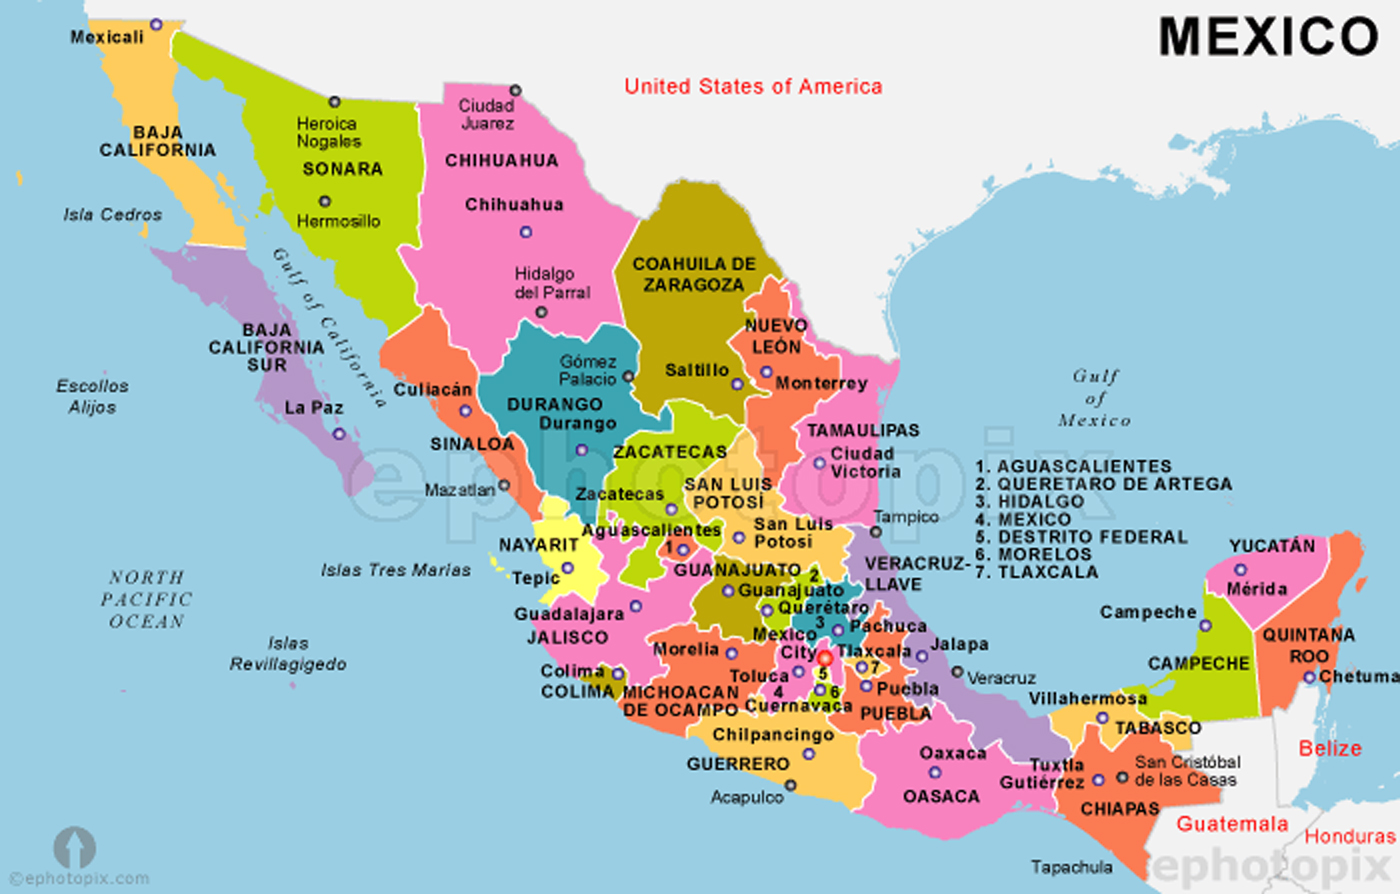 MEXICO MAP - Map Of World